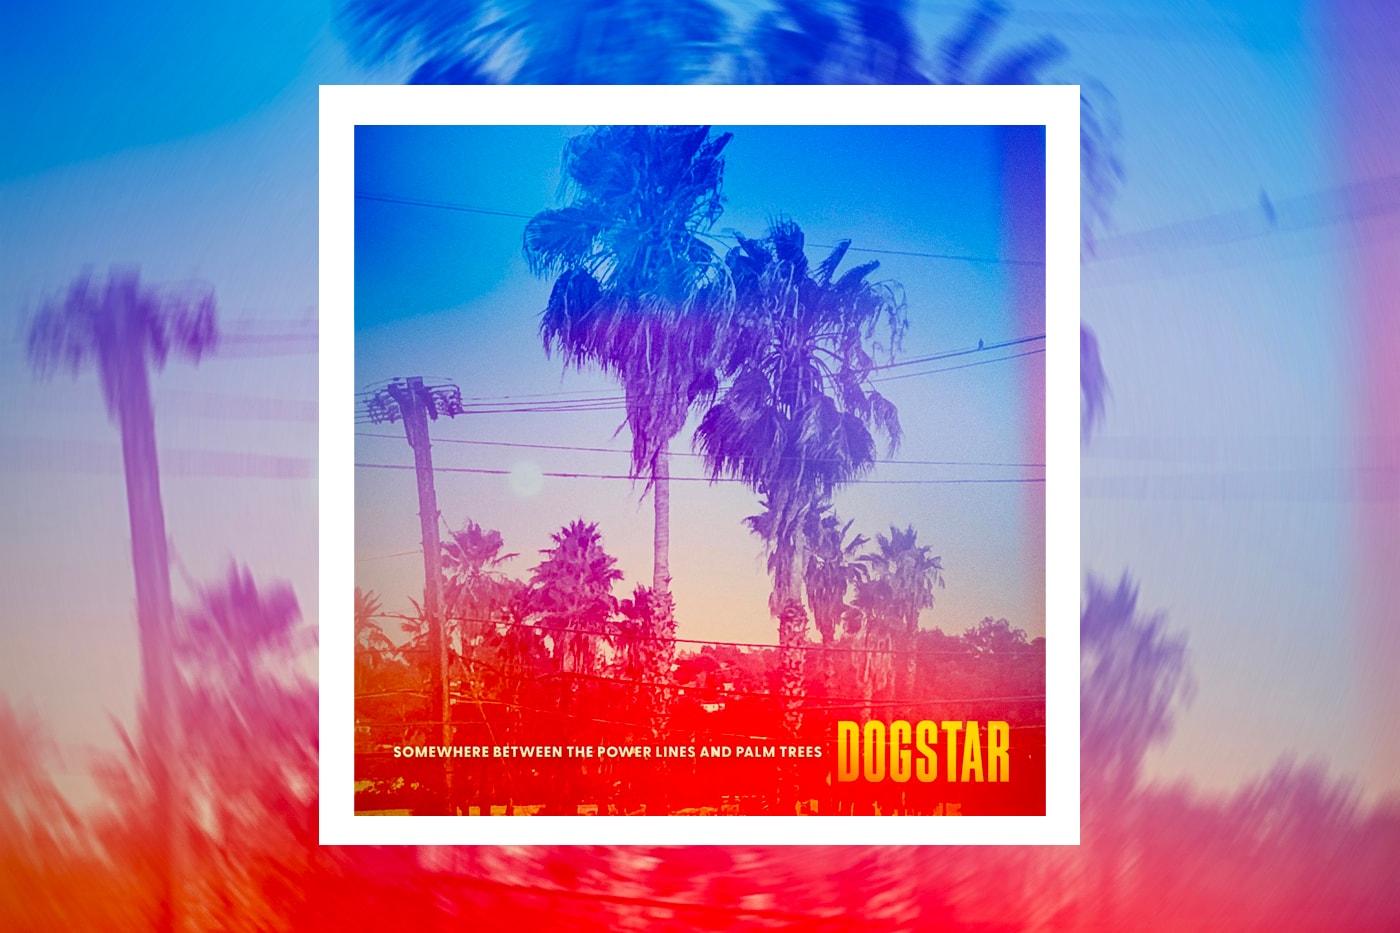 Dogstar keanu reeves Somewhere Between the Power Lines and Palm Tree new Album Release Info